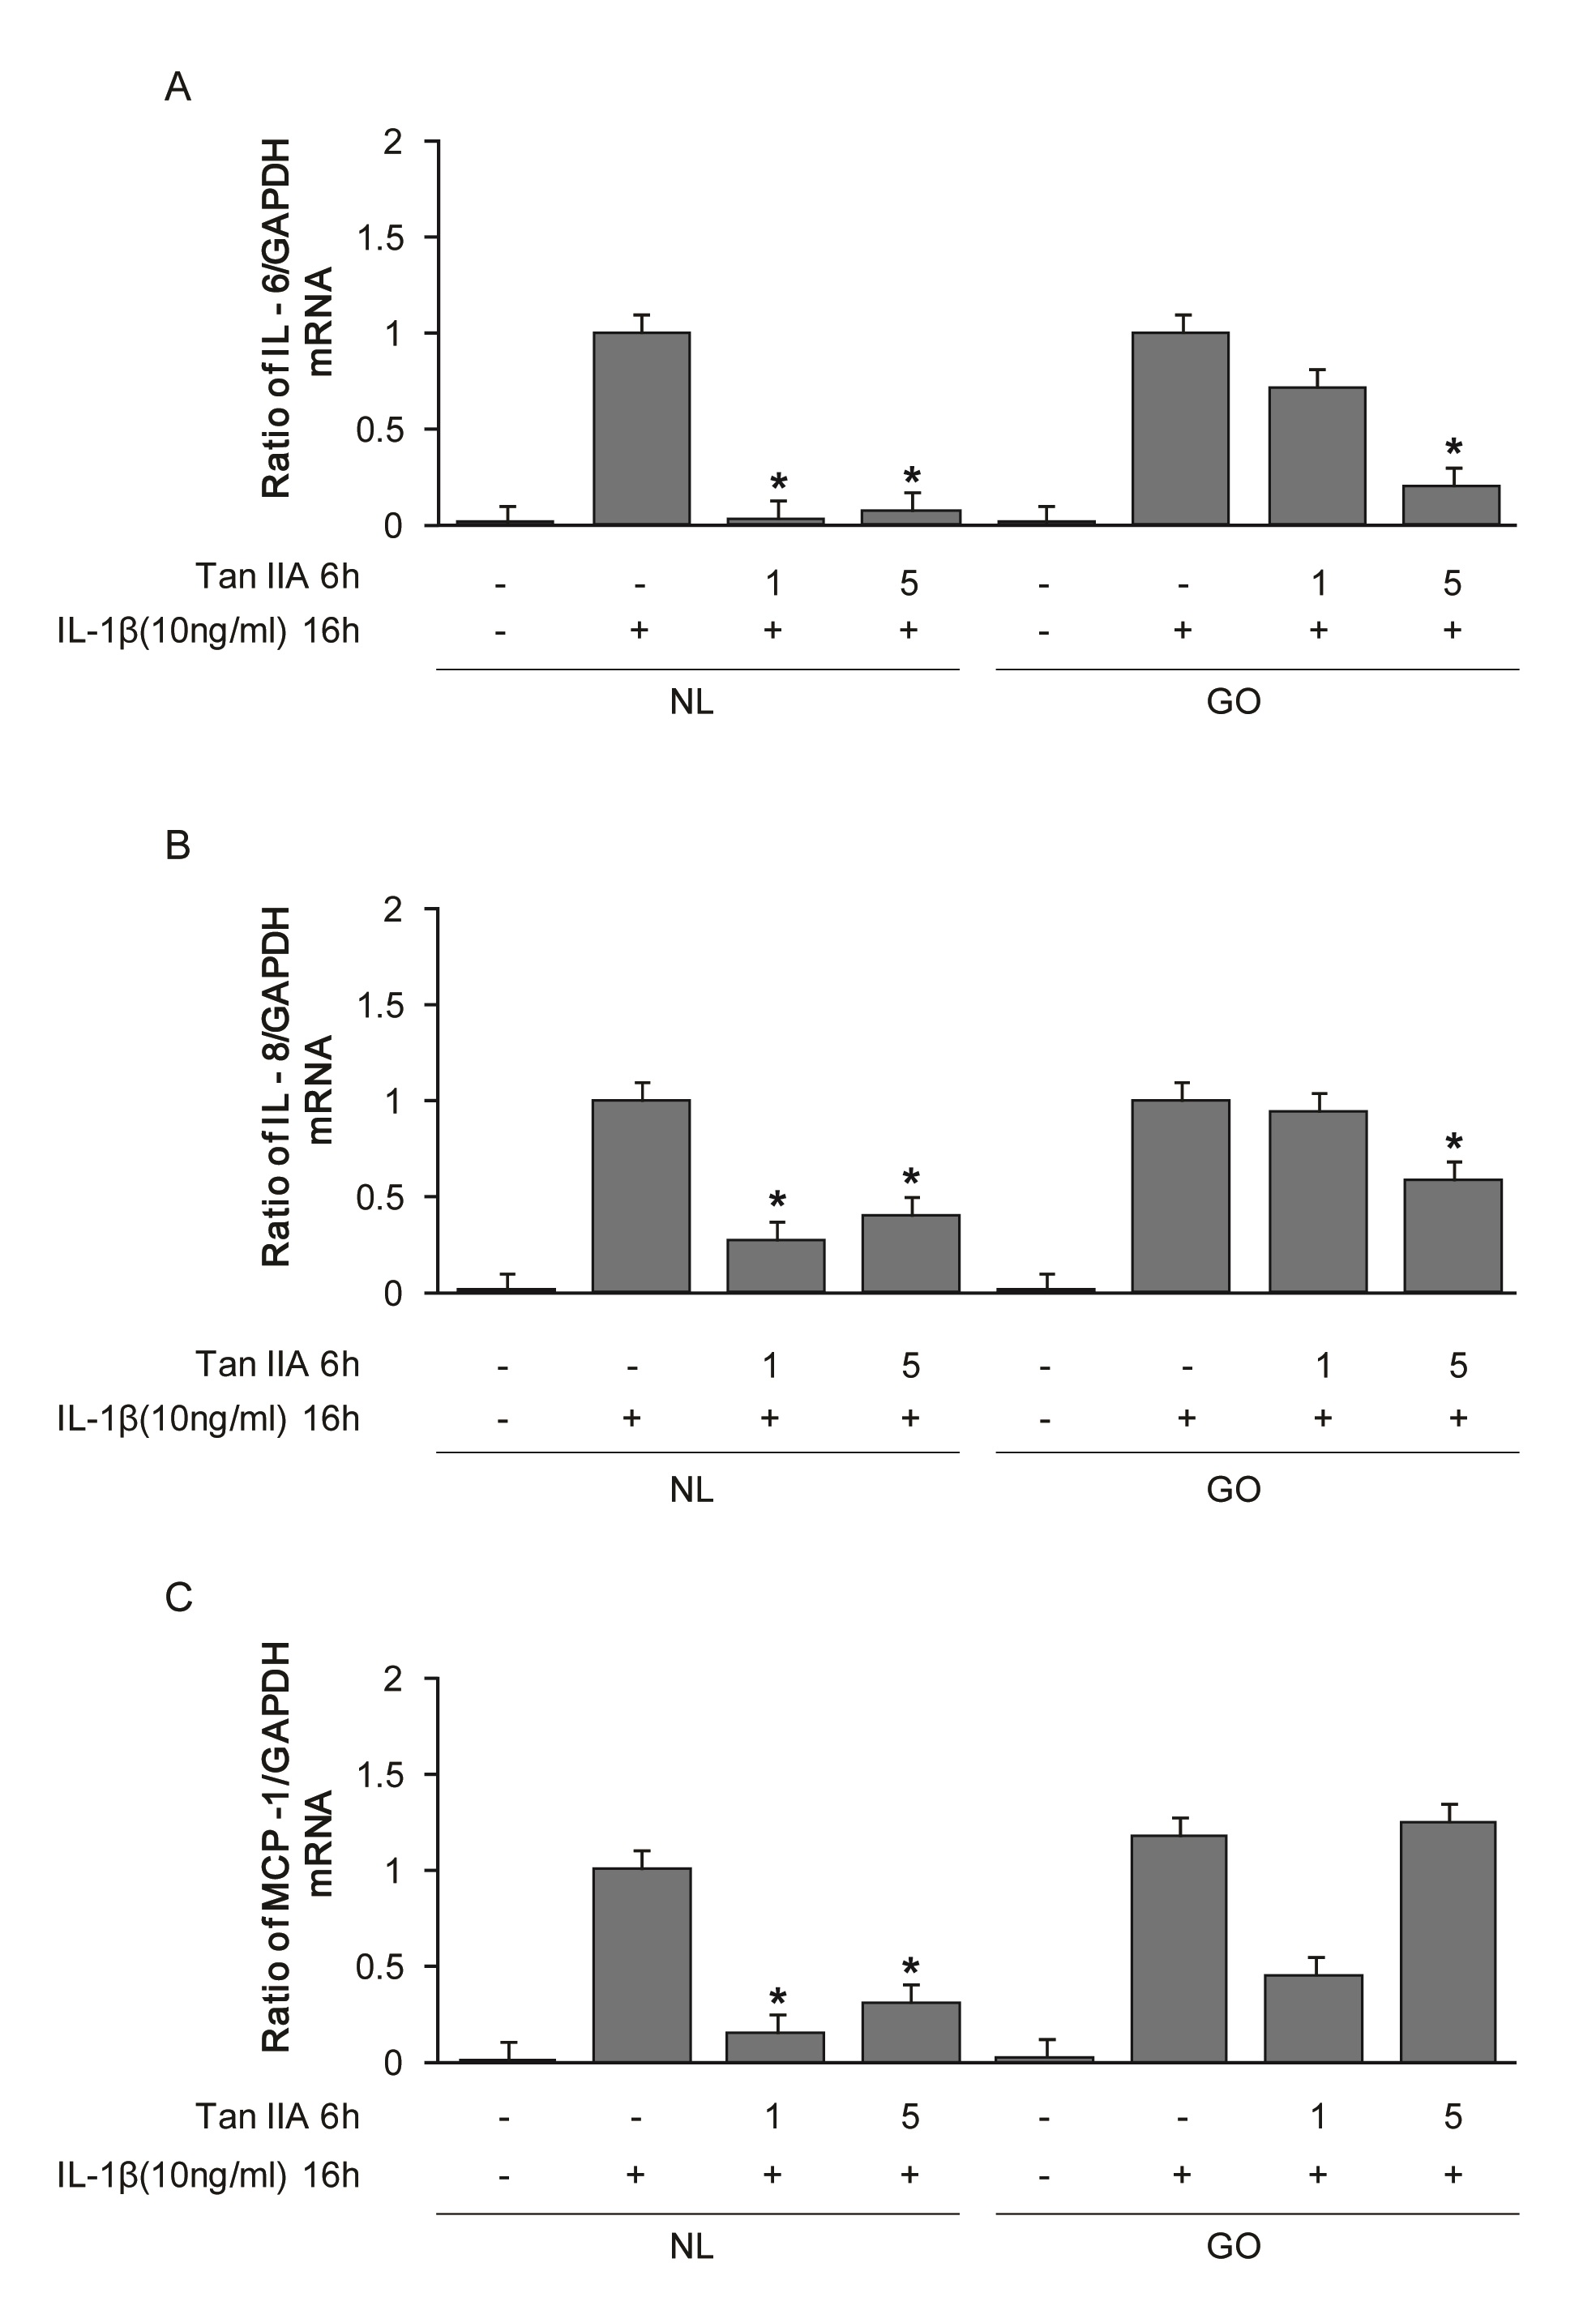 Figure 2. Effect of tanshinone IIA on tissue mRNA transcript levels ofinterleukin (IL)-6, IL-8, and monocyte chemotactic protein (MCP)-1. After treatment of tissue cultures with various concentrations of tanshinone IIA for 6 h, total RNA (1 μg) was isolated and reverse transcribed into cDNA, which was amplified for IL-6, IL-8, and MCP-1 mRNA by real-time PCR. Gene transcript levels of IL-6 (A), IL-8 (B), and MCP-1 (C) are as shown as mean ± SD fold depression in cytokine mRNA levels relative to the control samples without tanshinone IIA treatment.